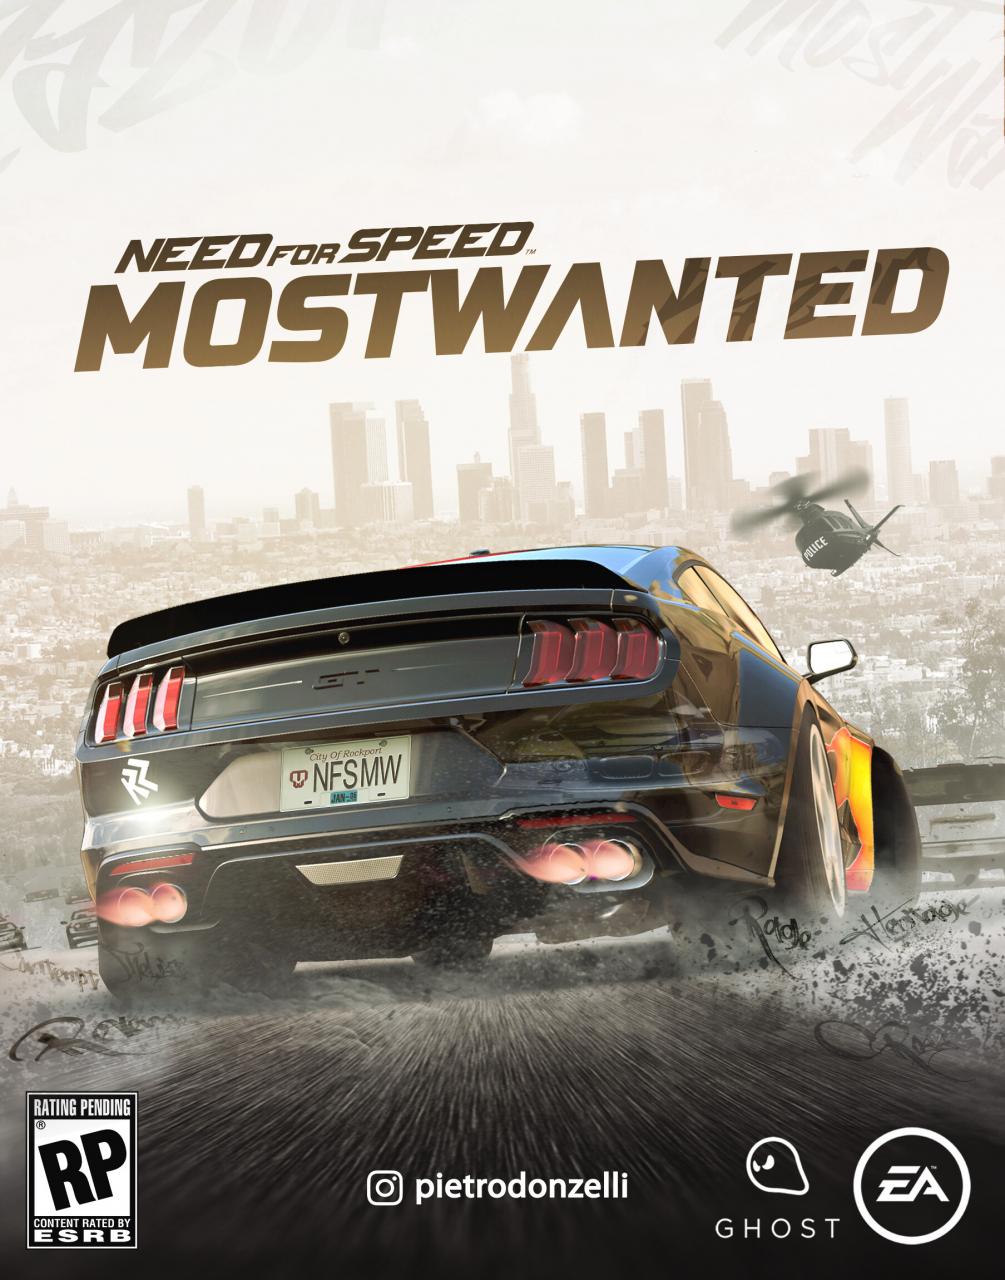 ArtStation - Need For Speed Most Wanted part II, DONZ